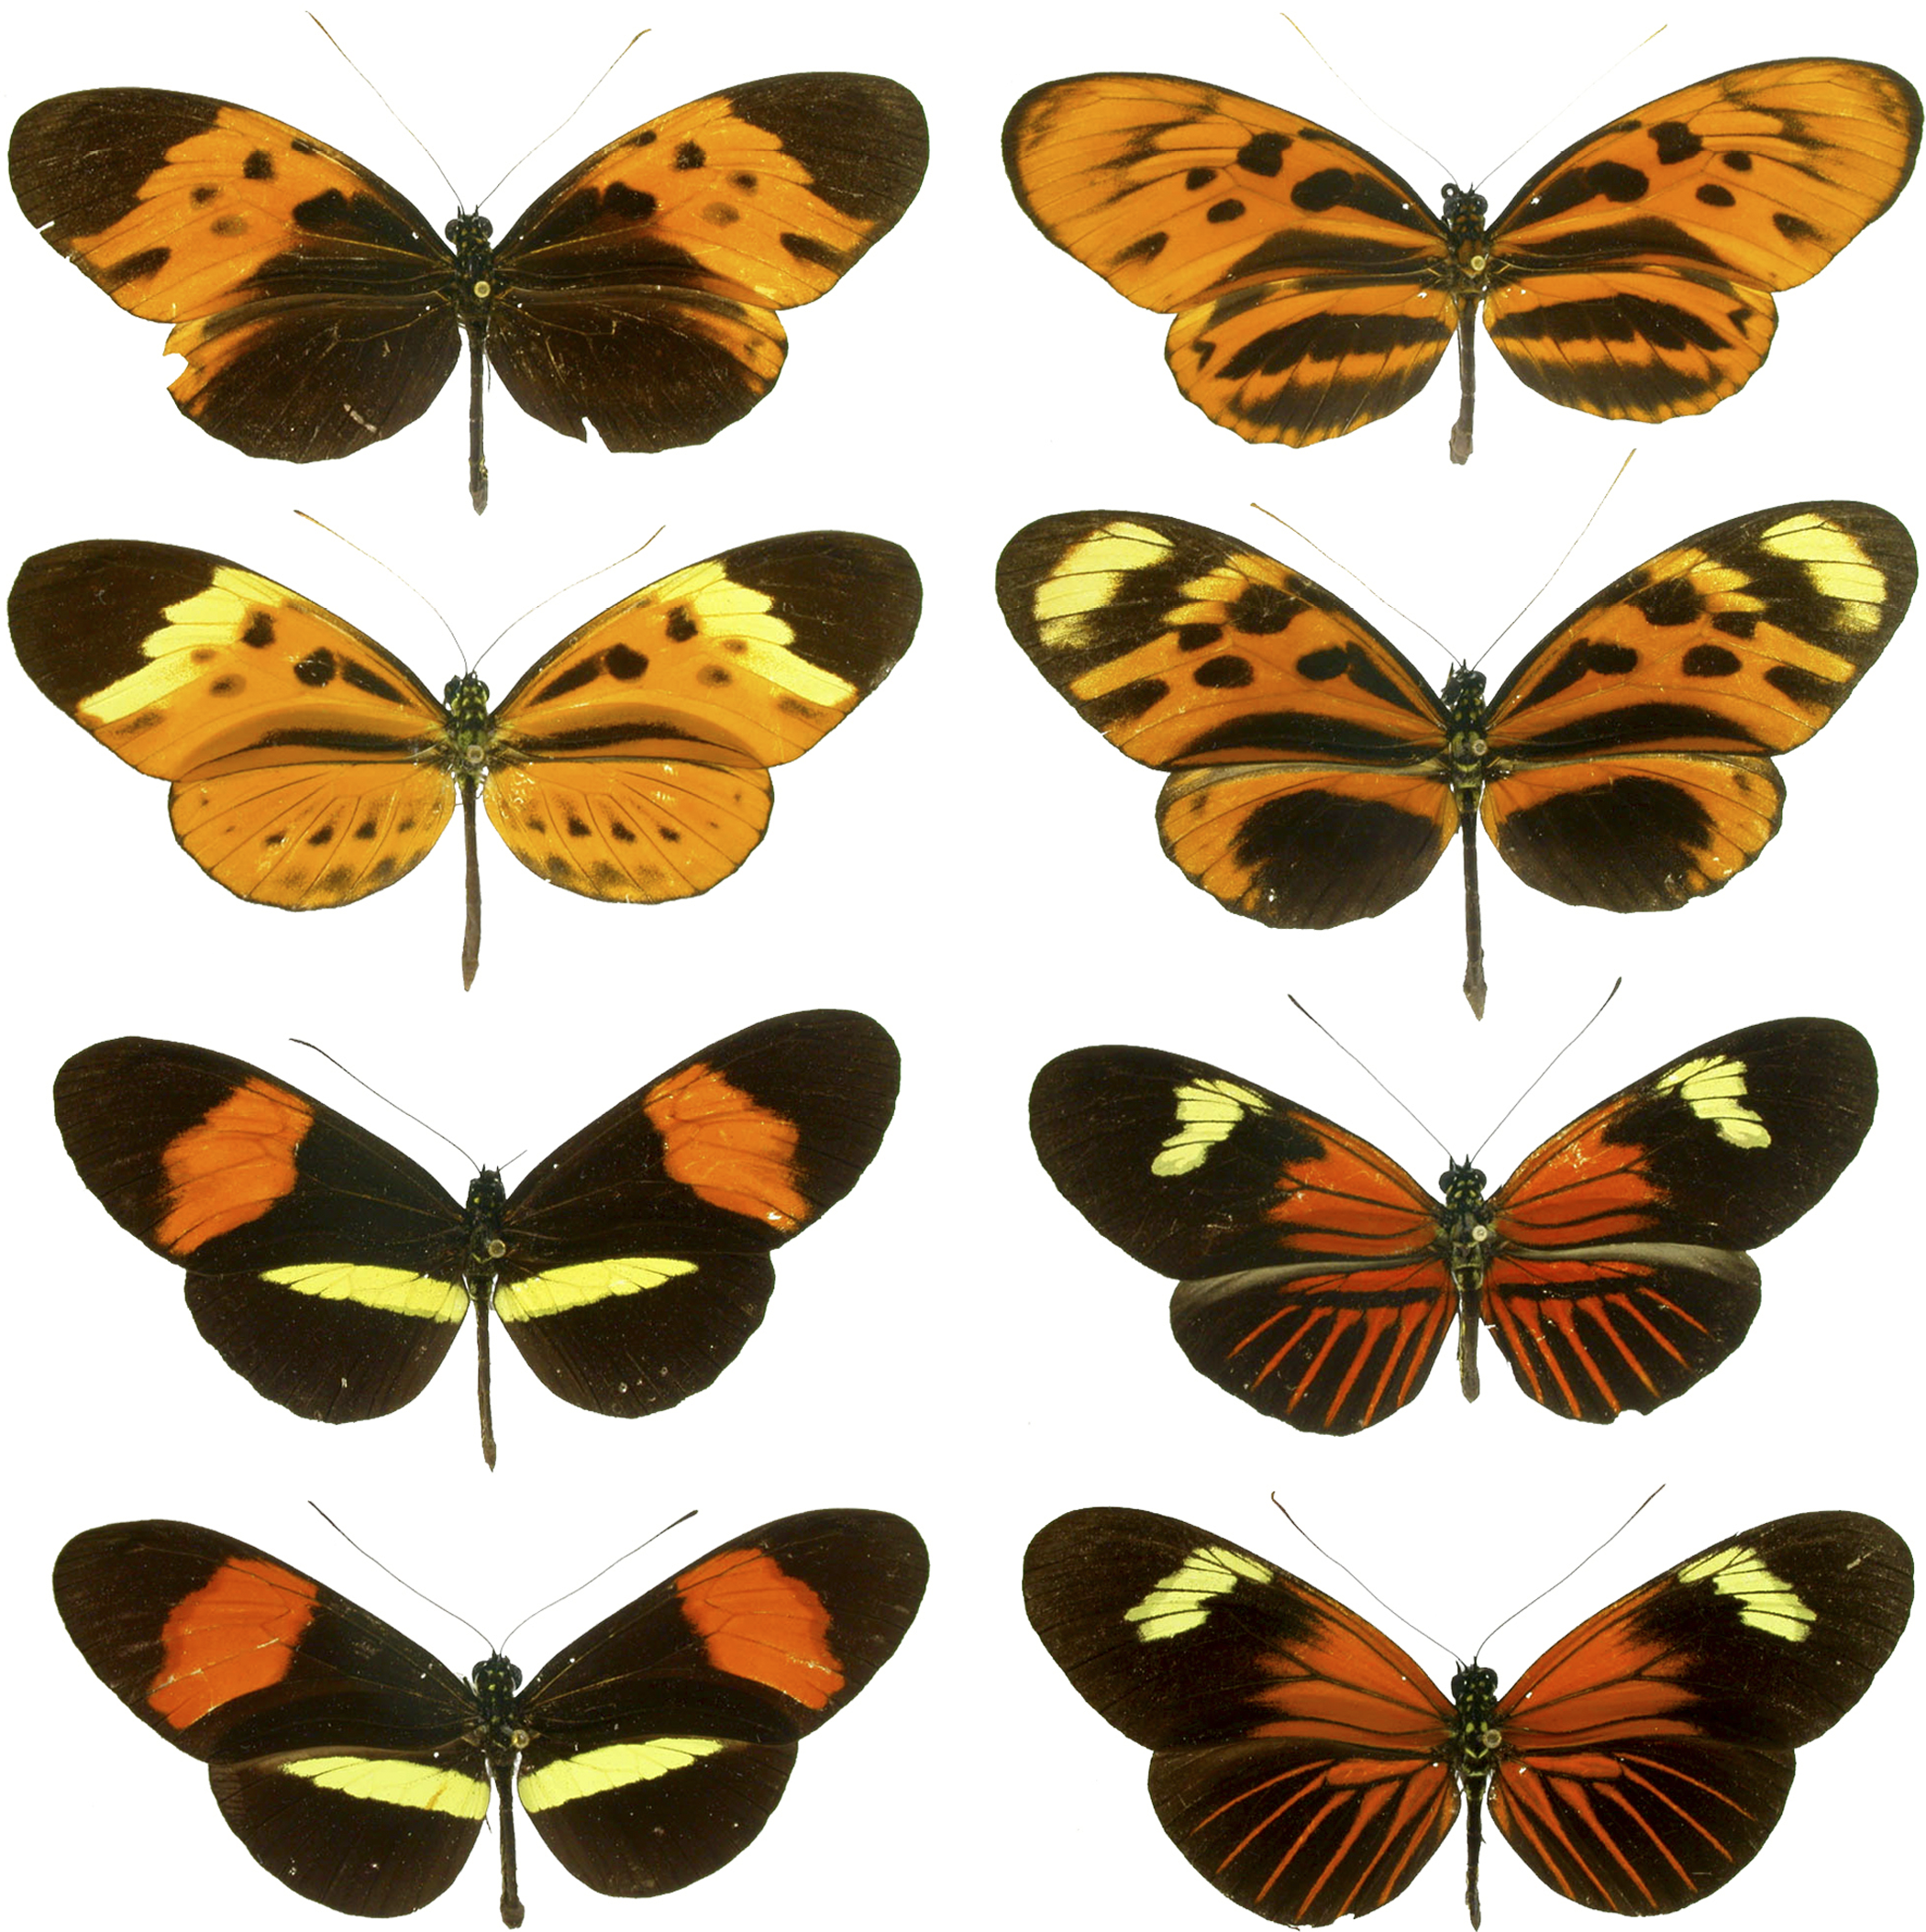 Heliconius_mimicry_573f6a8db7907.png